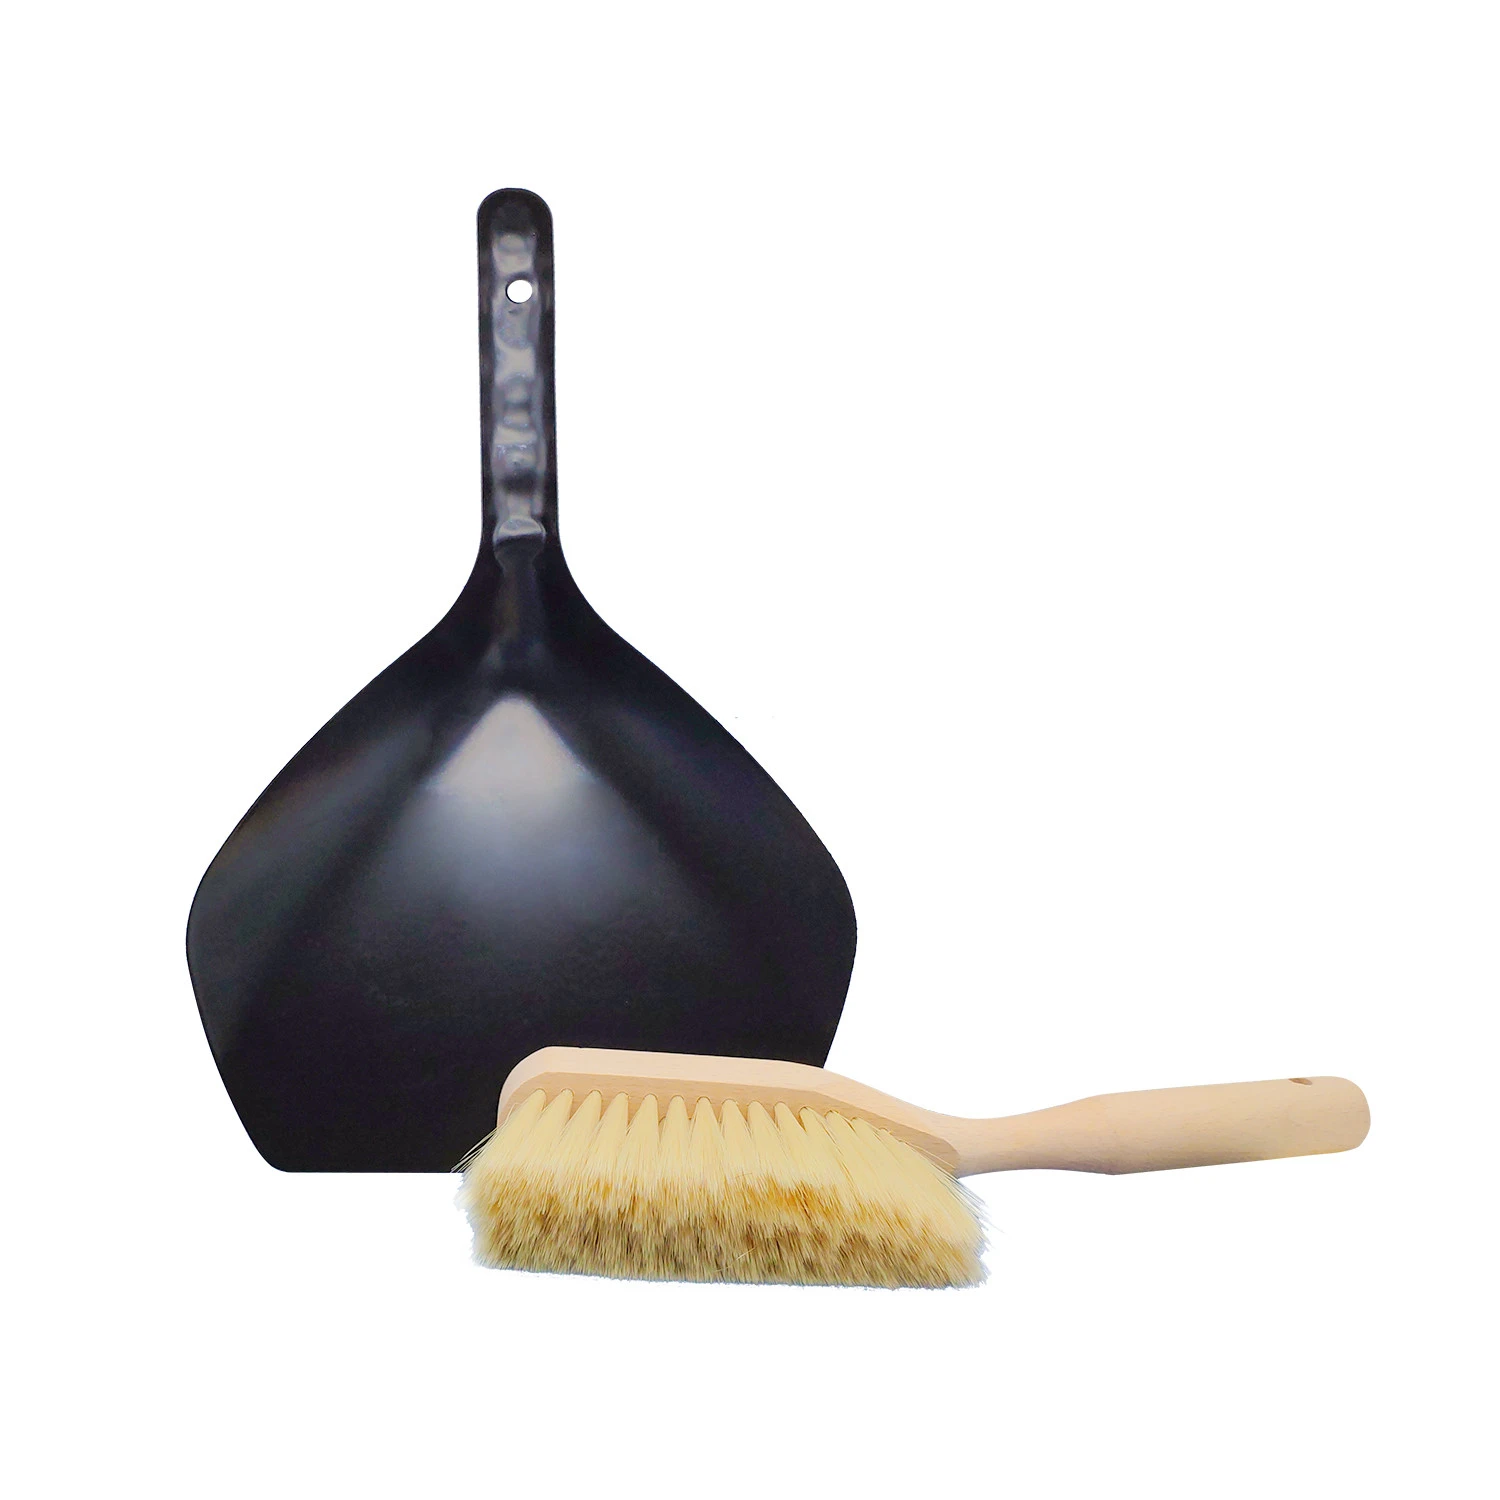 Novel wooden brush mini broom and dustpan set for house cleaning